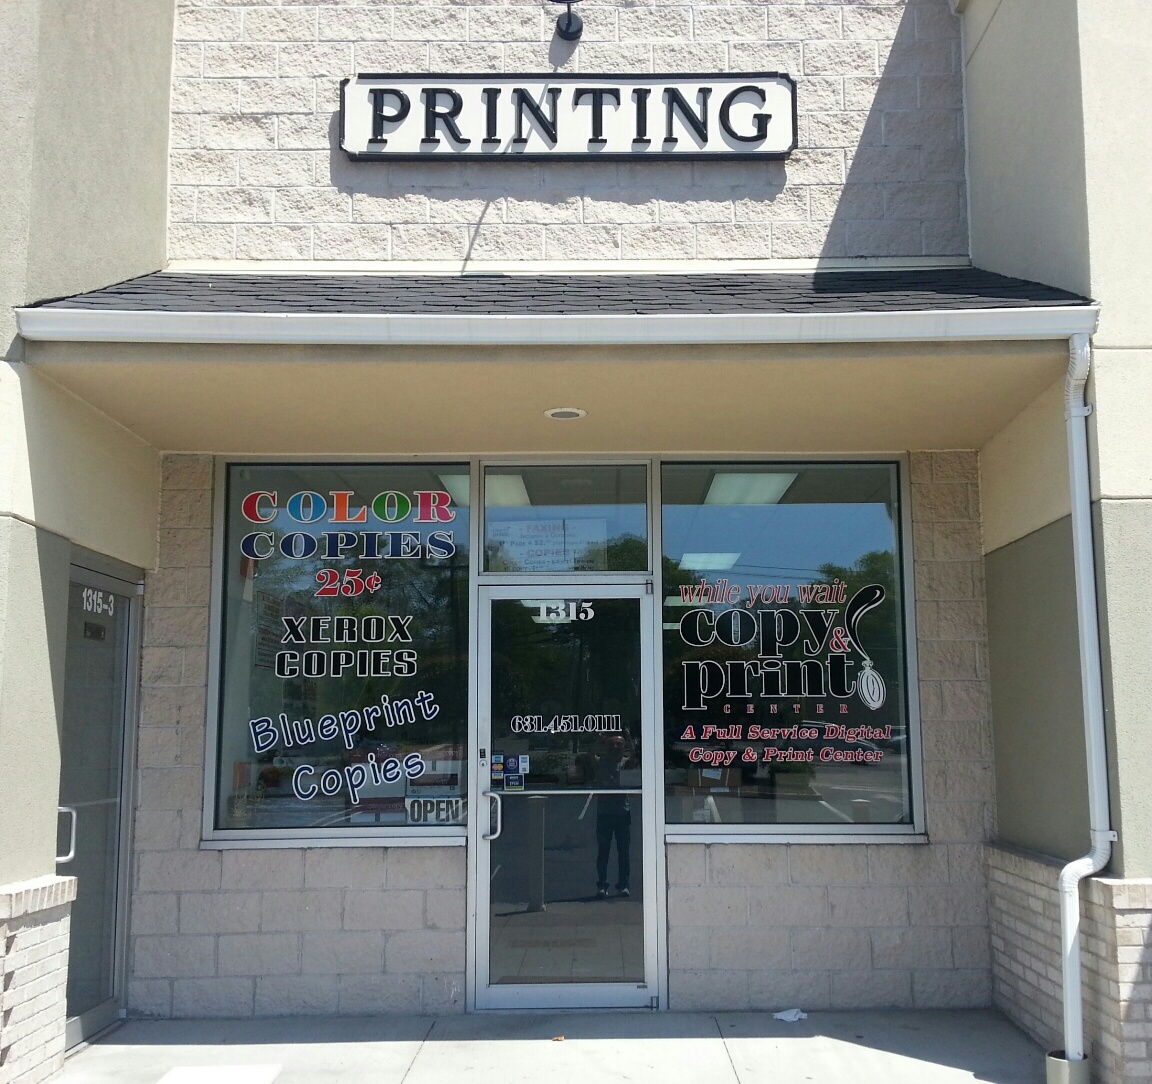 While You Wait Copy and Print, 1315 Middle Country Road Centereach, NY 11720! Over 30 Years of Printing Experience from the Owner/Operator!